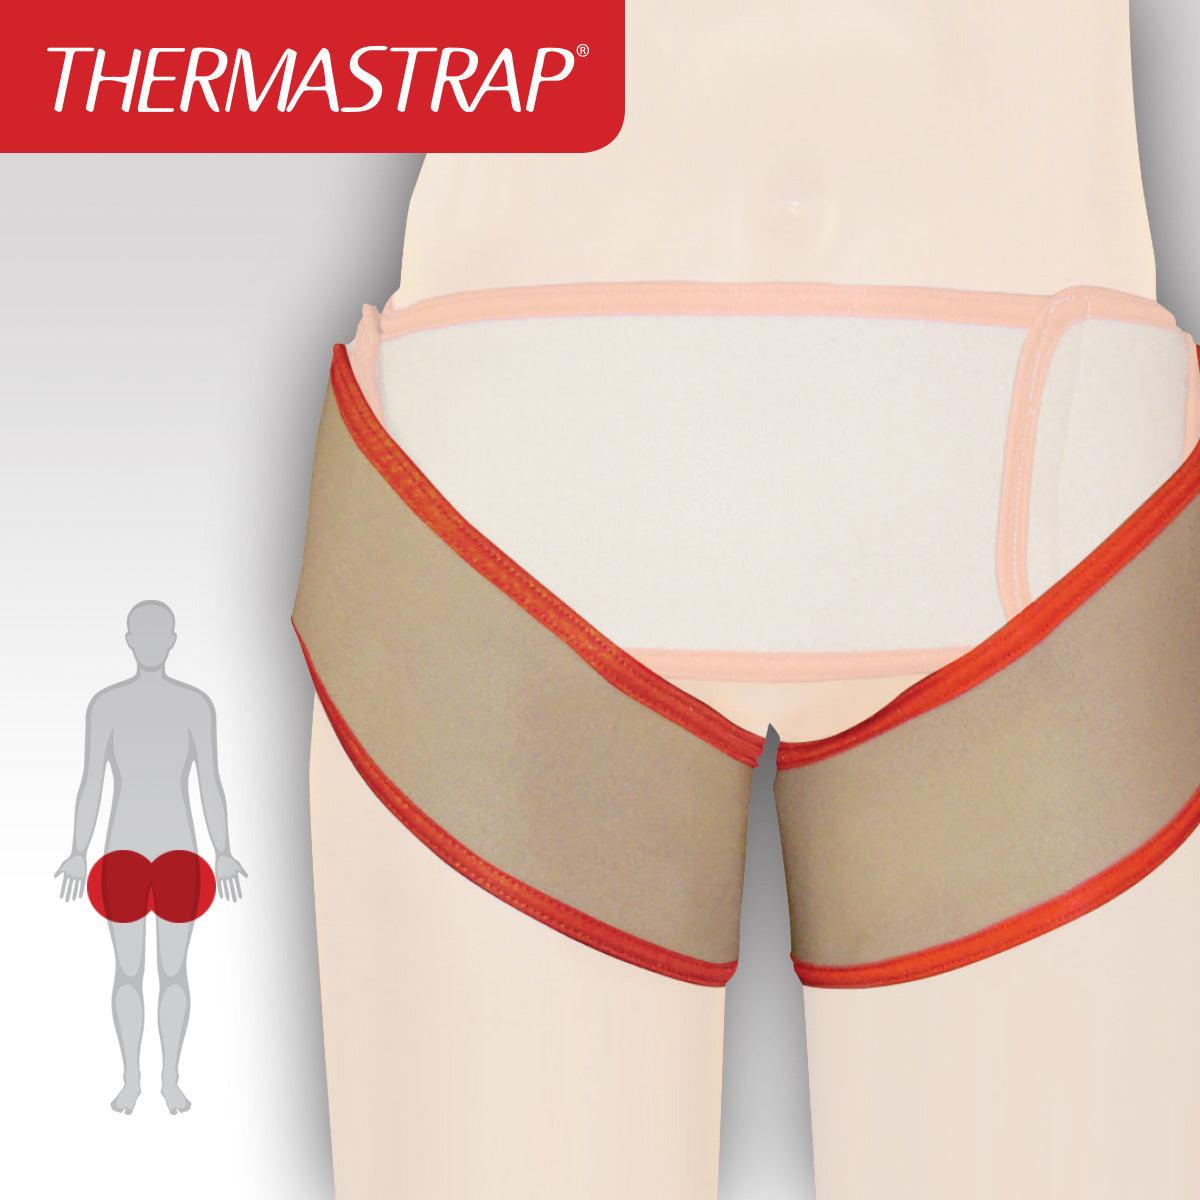 Thermastrap Hip Overstrap